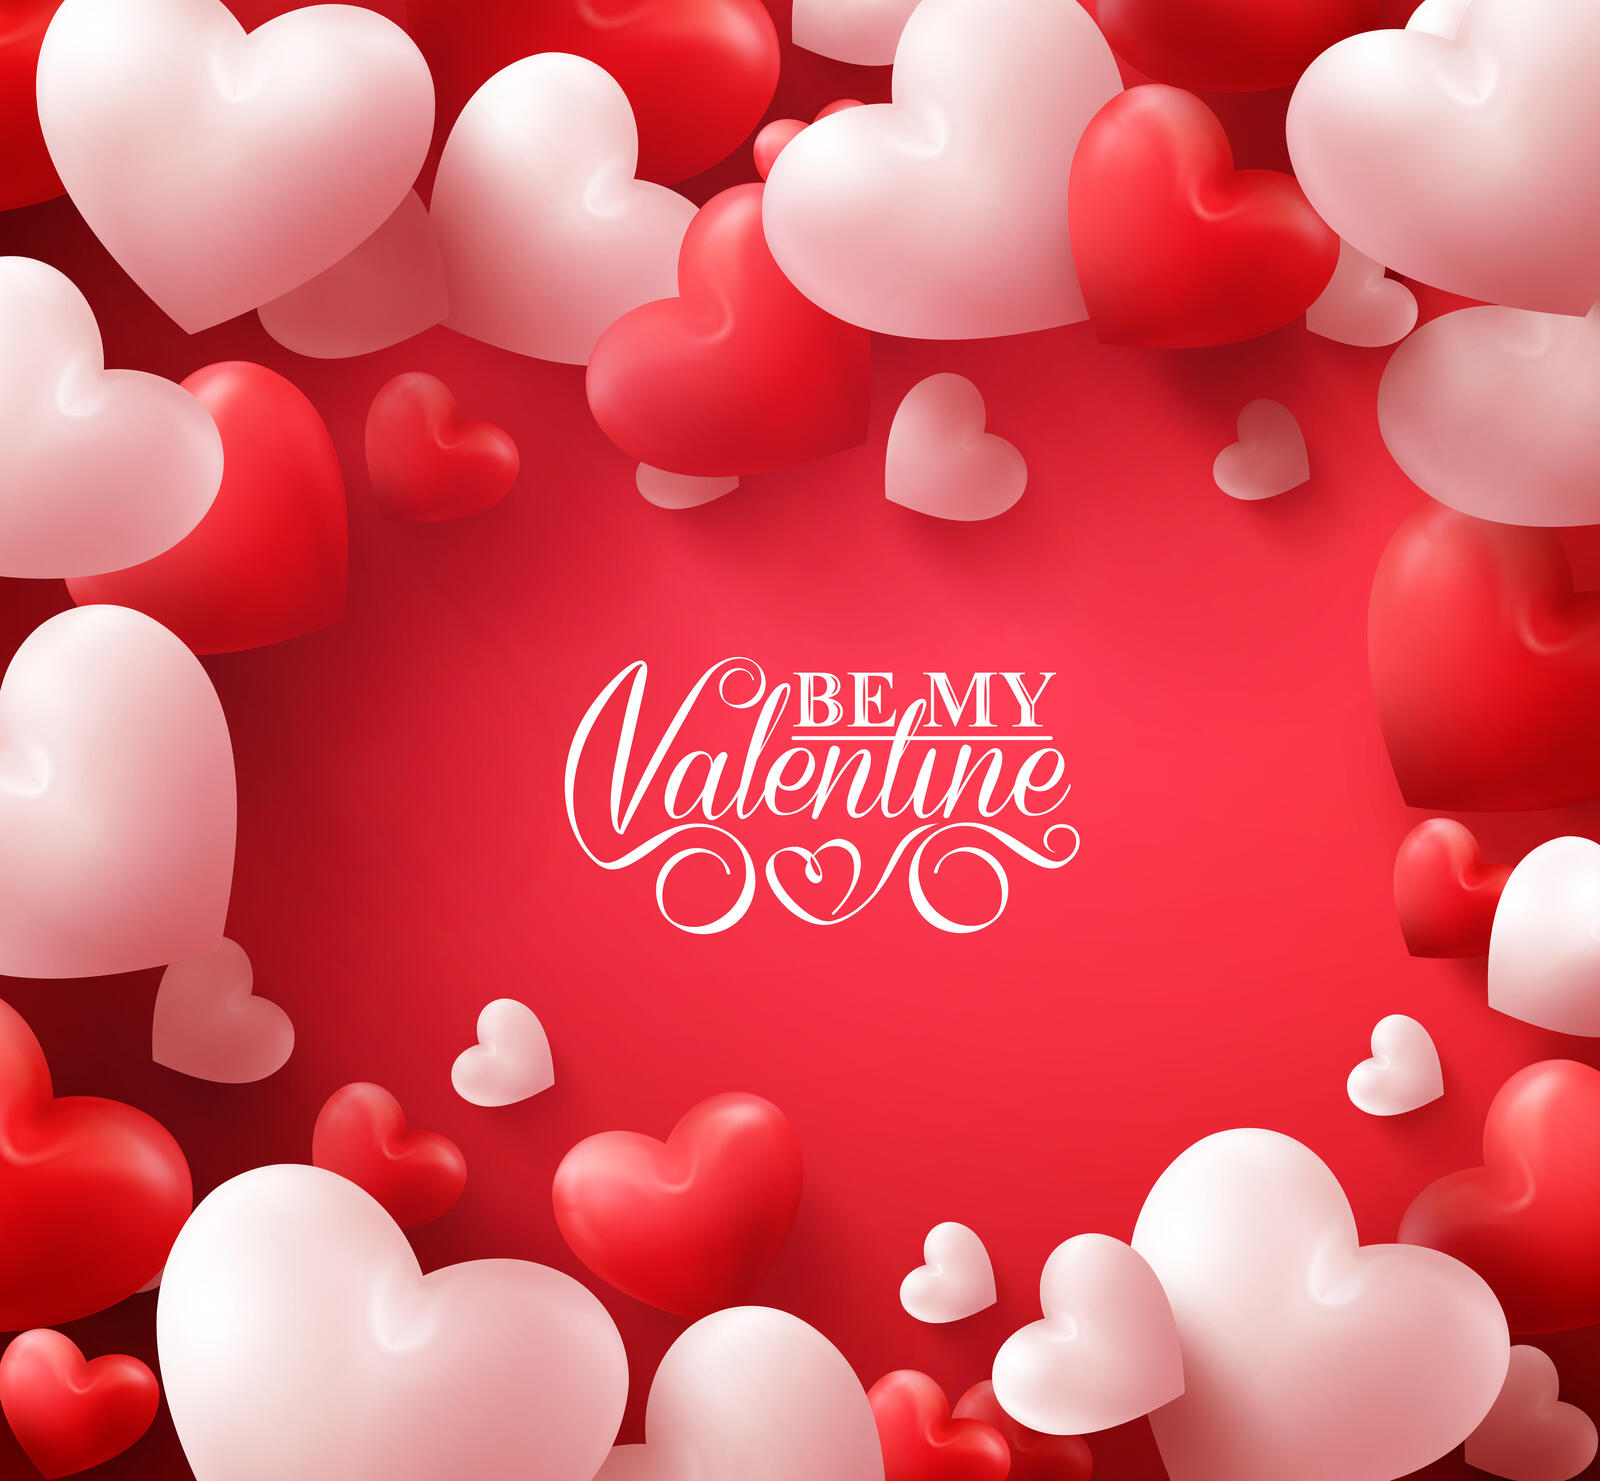 Wallpapers Valentine day romantic hearts holidays on the desktop